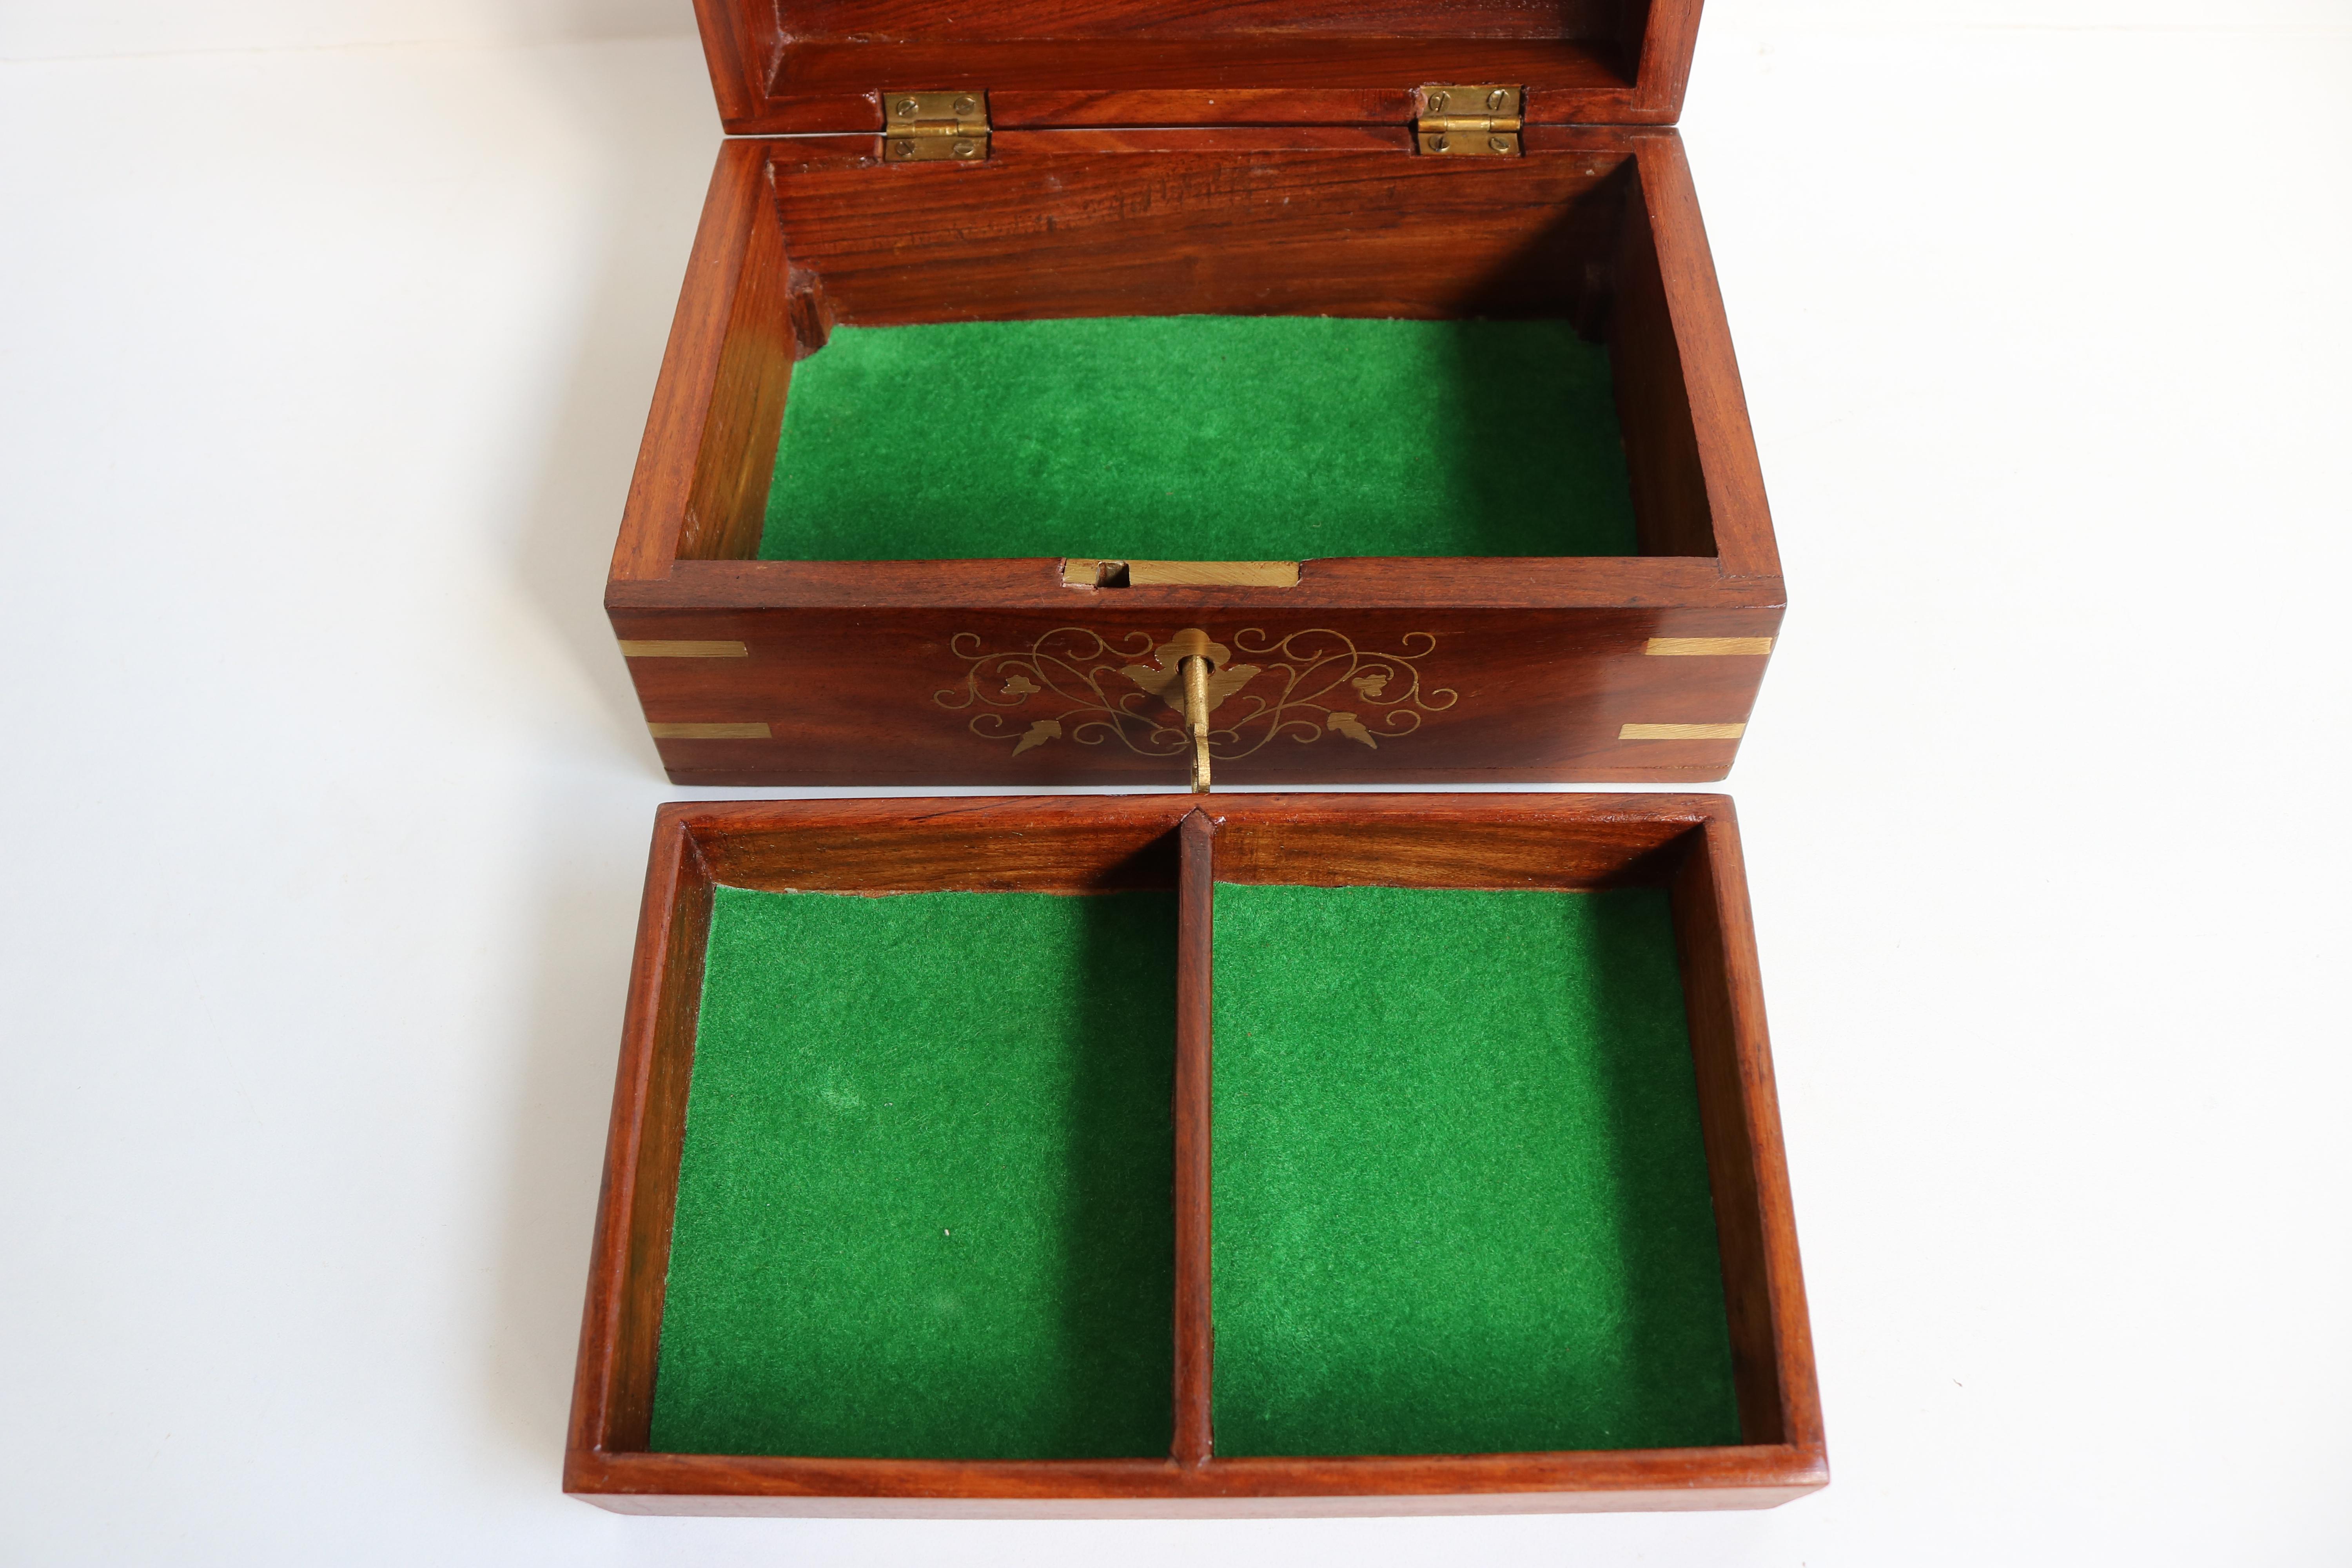 Antique French Jewelry Box with Inlaid Brass 1900 Arts & Crafts Period For Sale 1